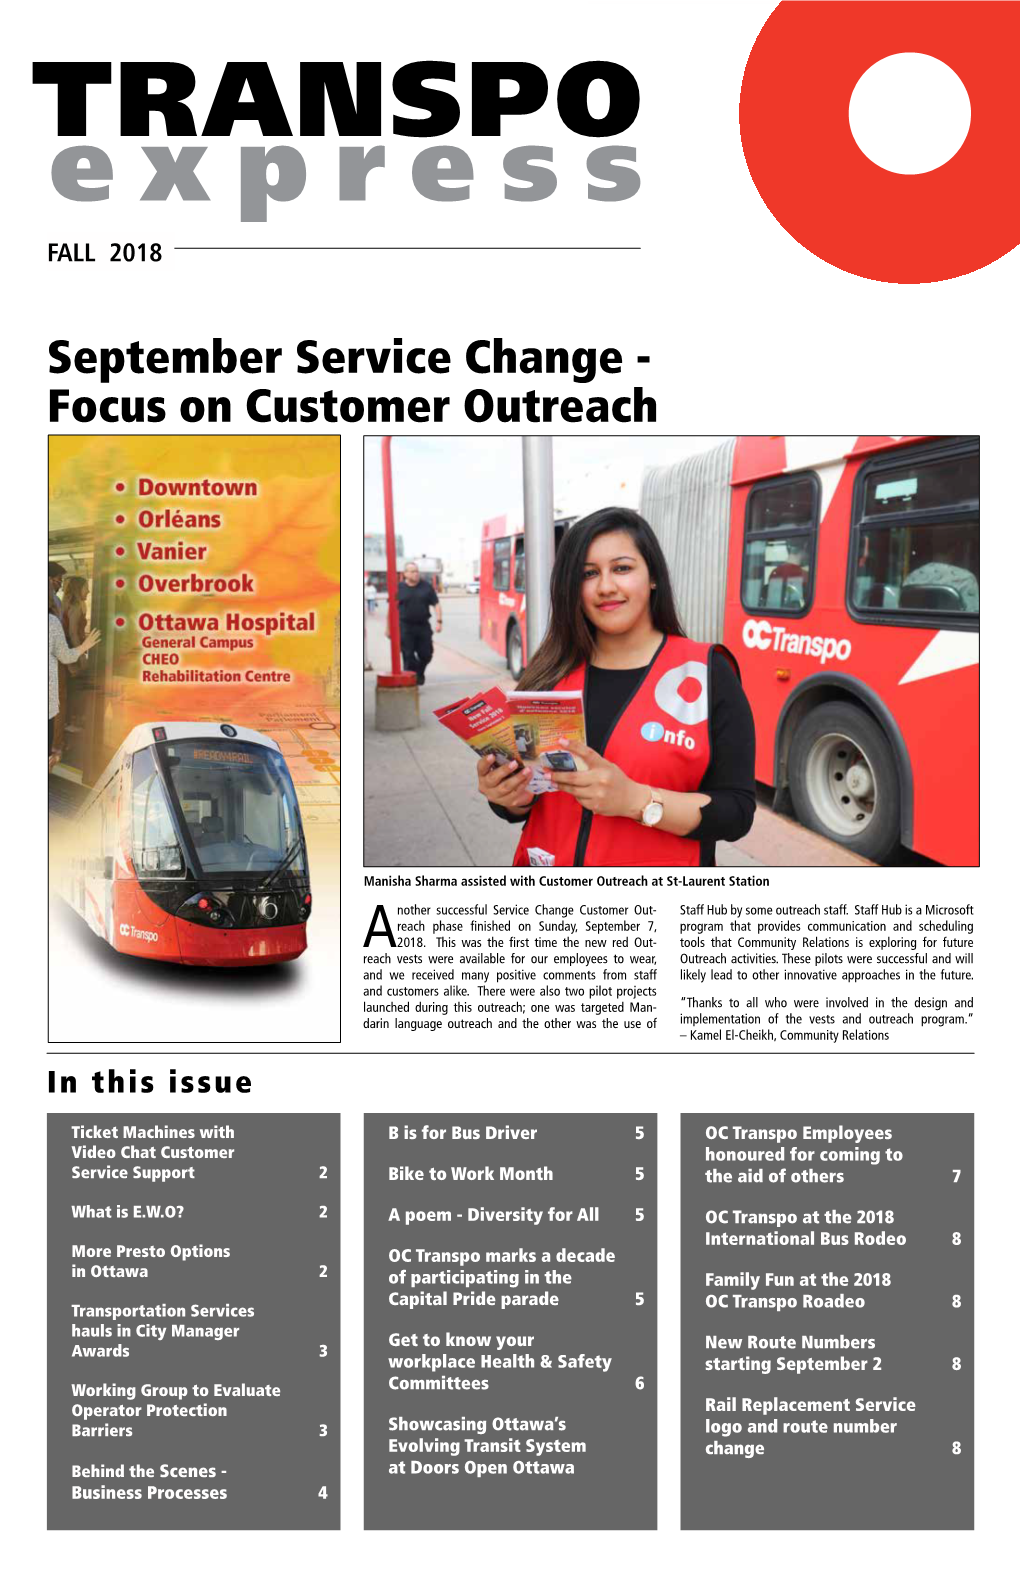 September Service Change - Focus on Customer Outreach